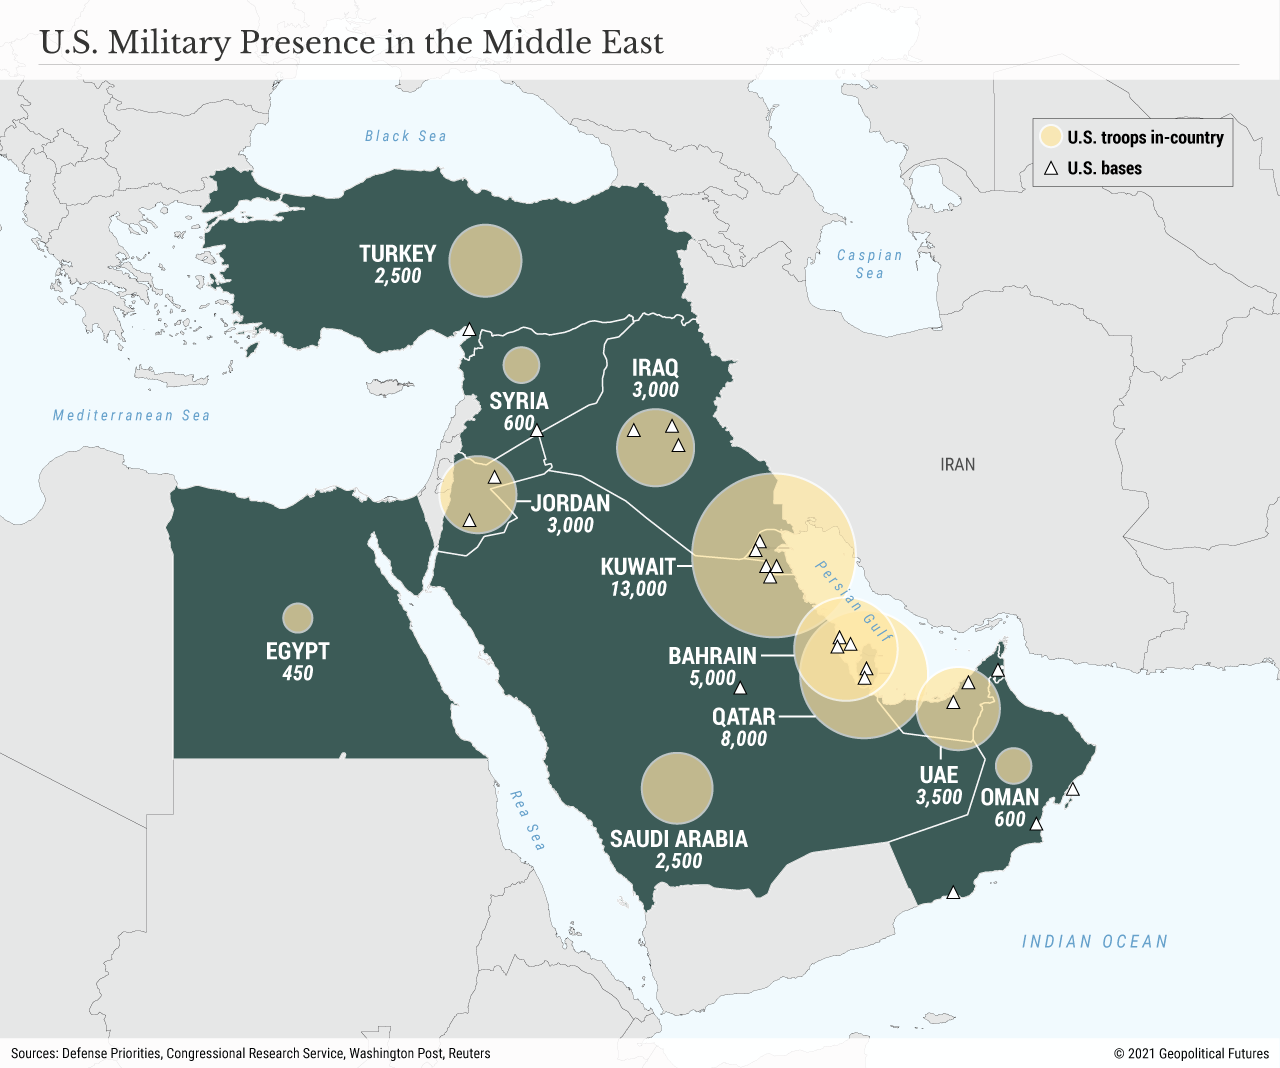 U.S. Military Presence in the Middle East